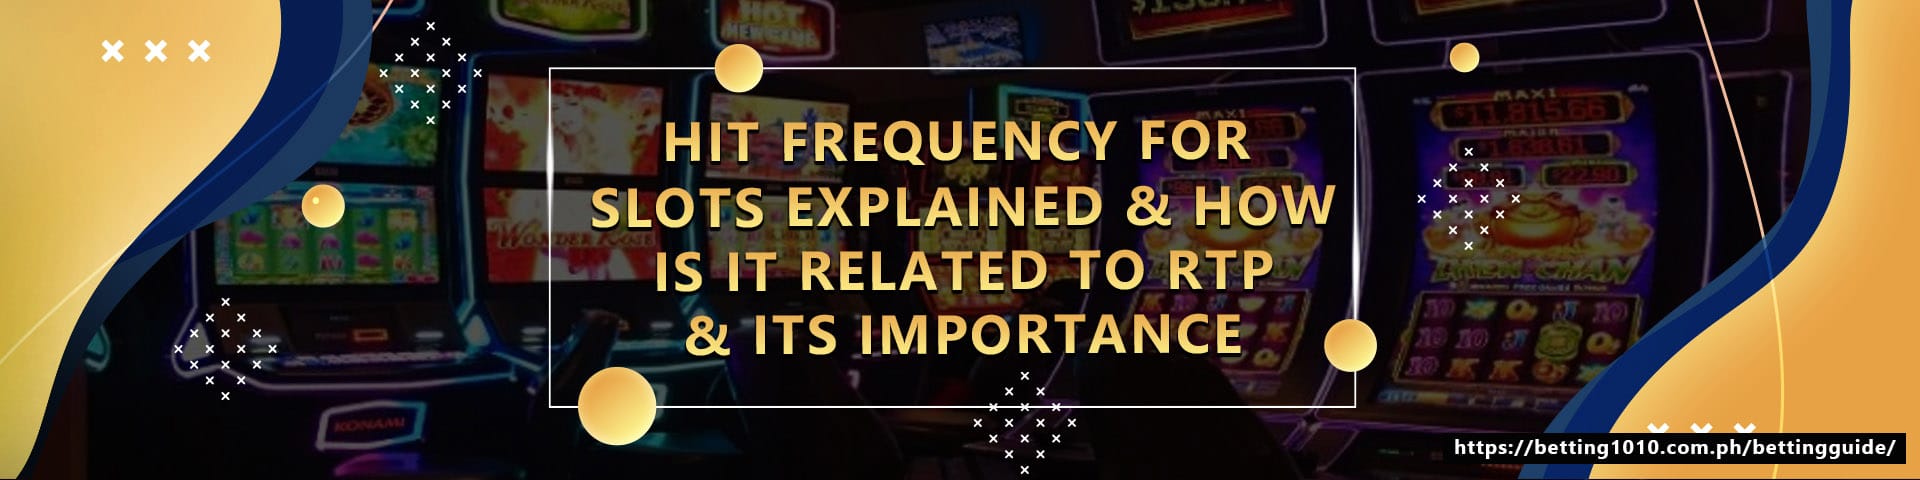 HIt Frequency for slots explained & how is it related to rtp & its importance